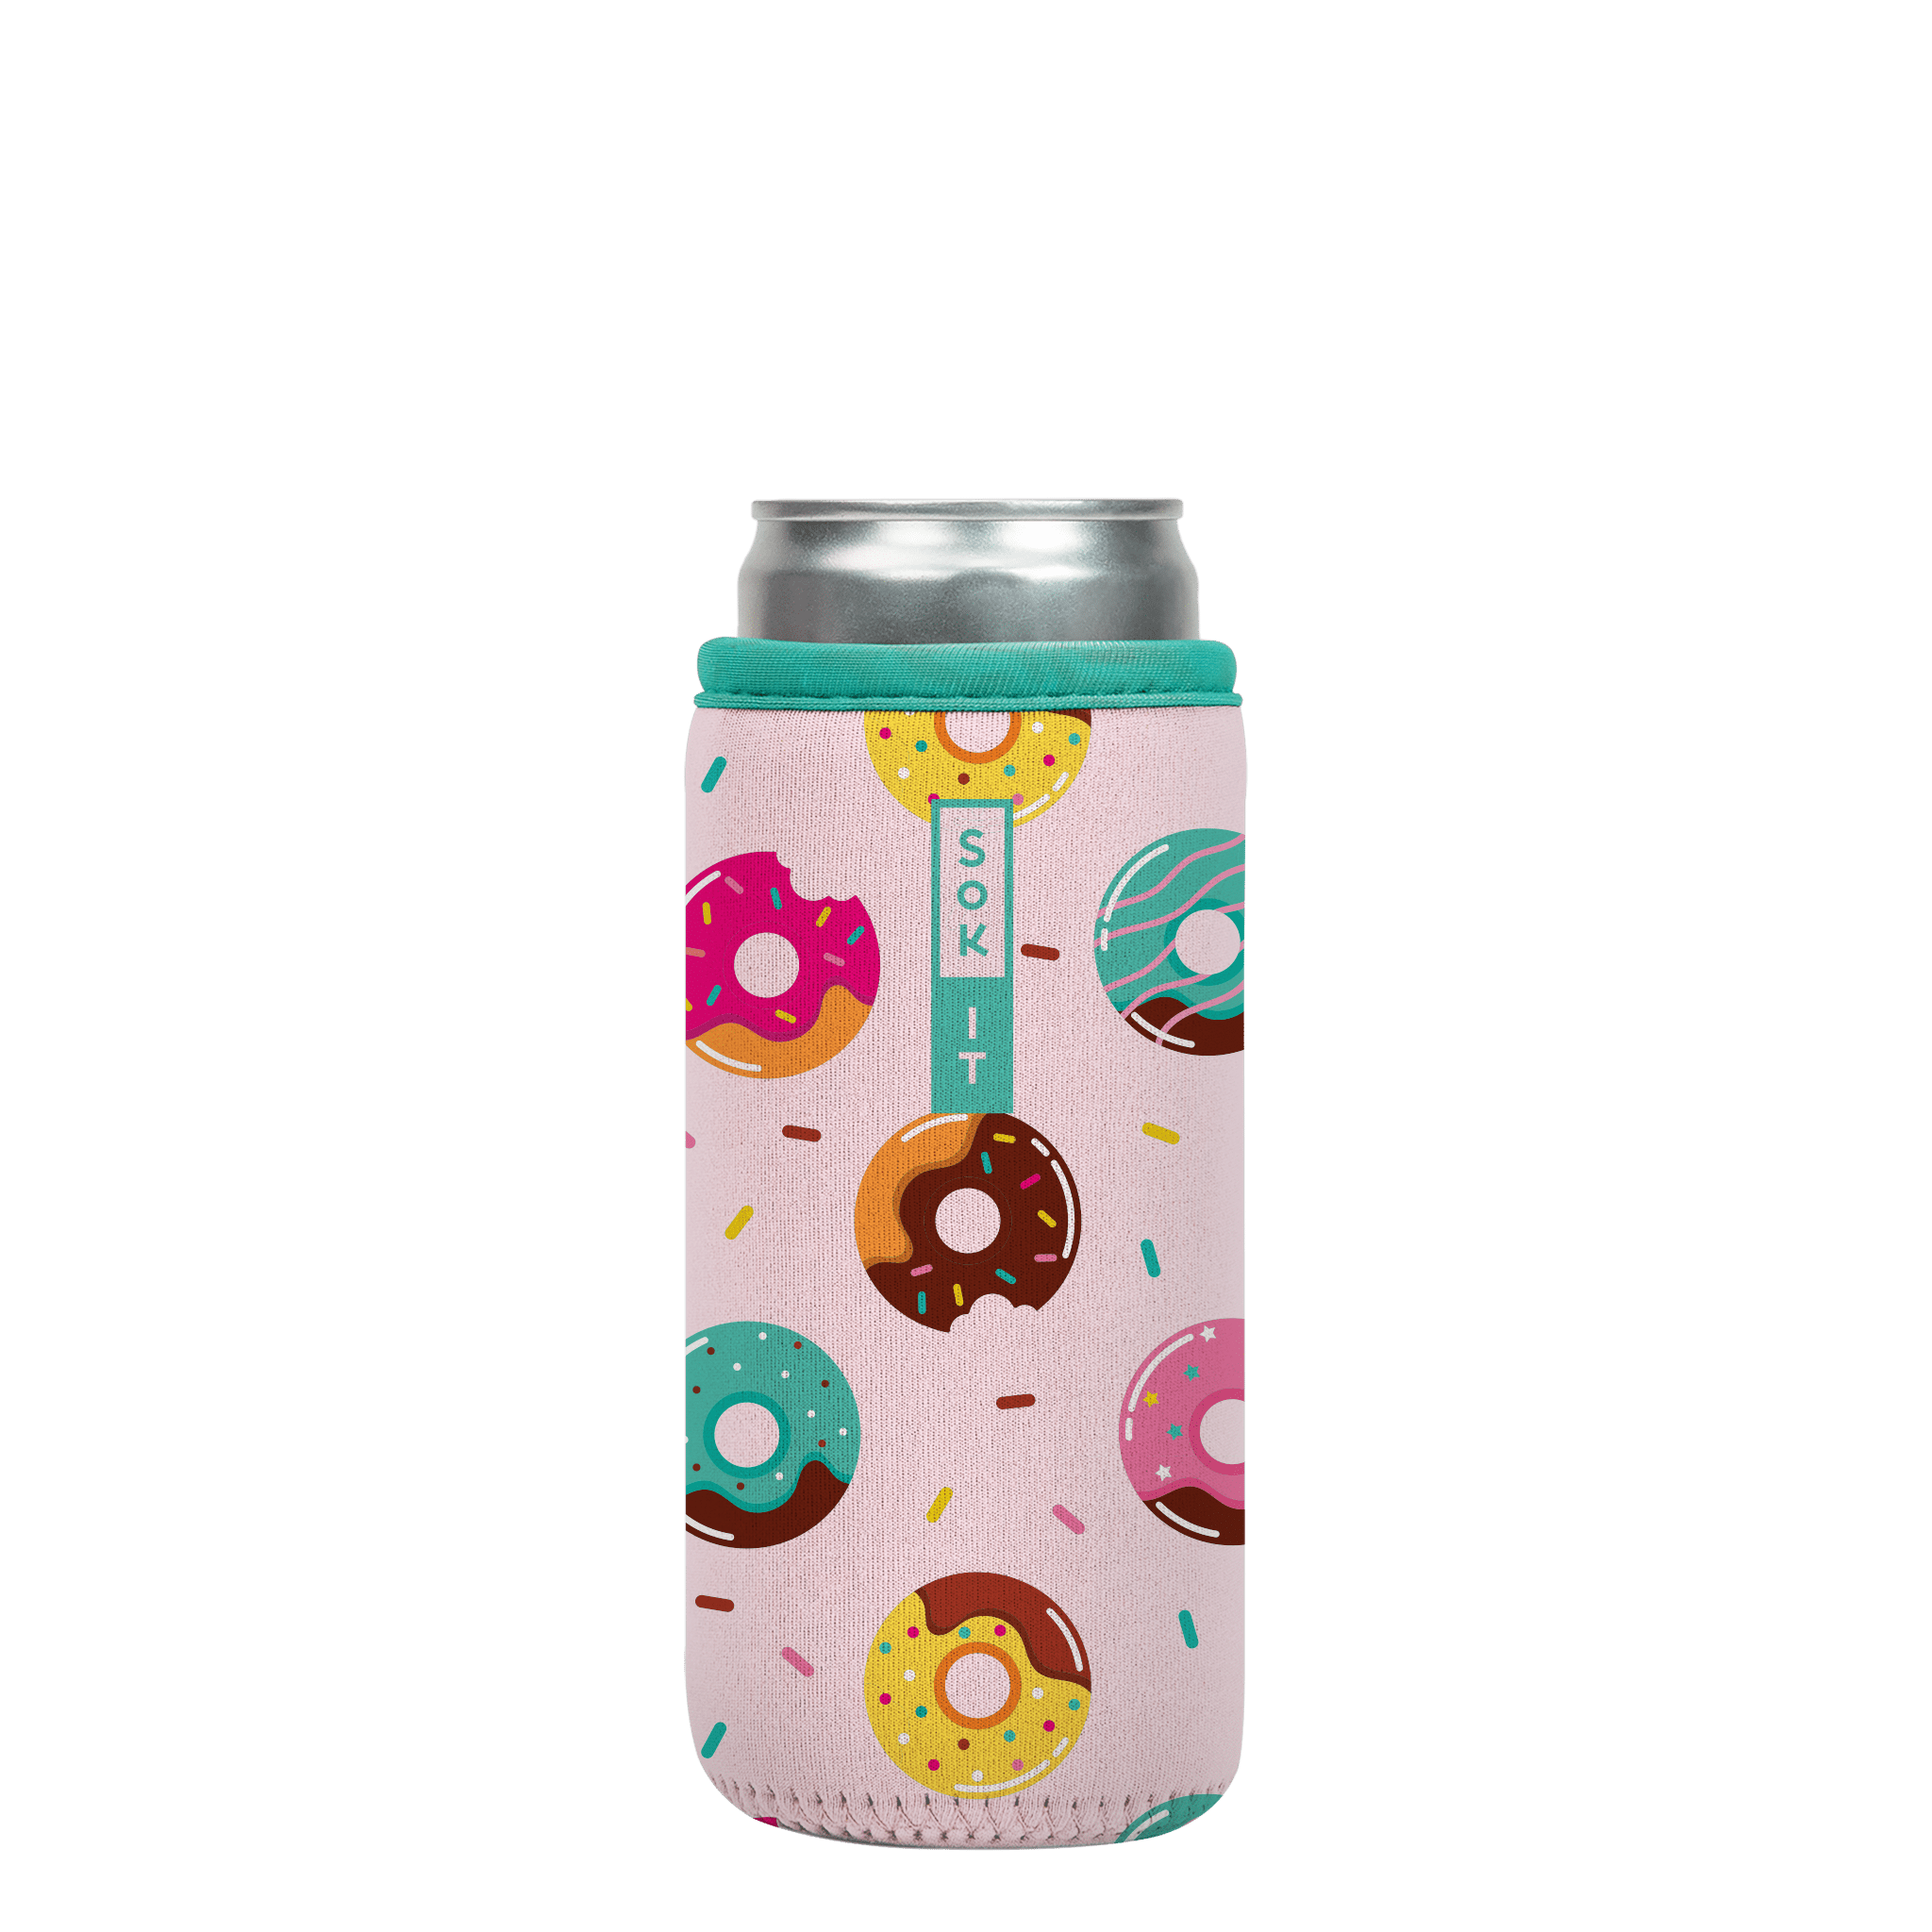 CanSok-Food Donut Delight 12oz Slim Can